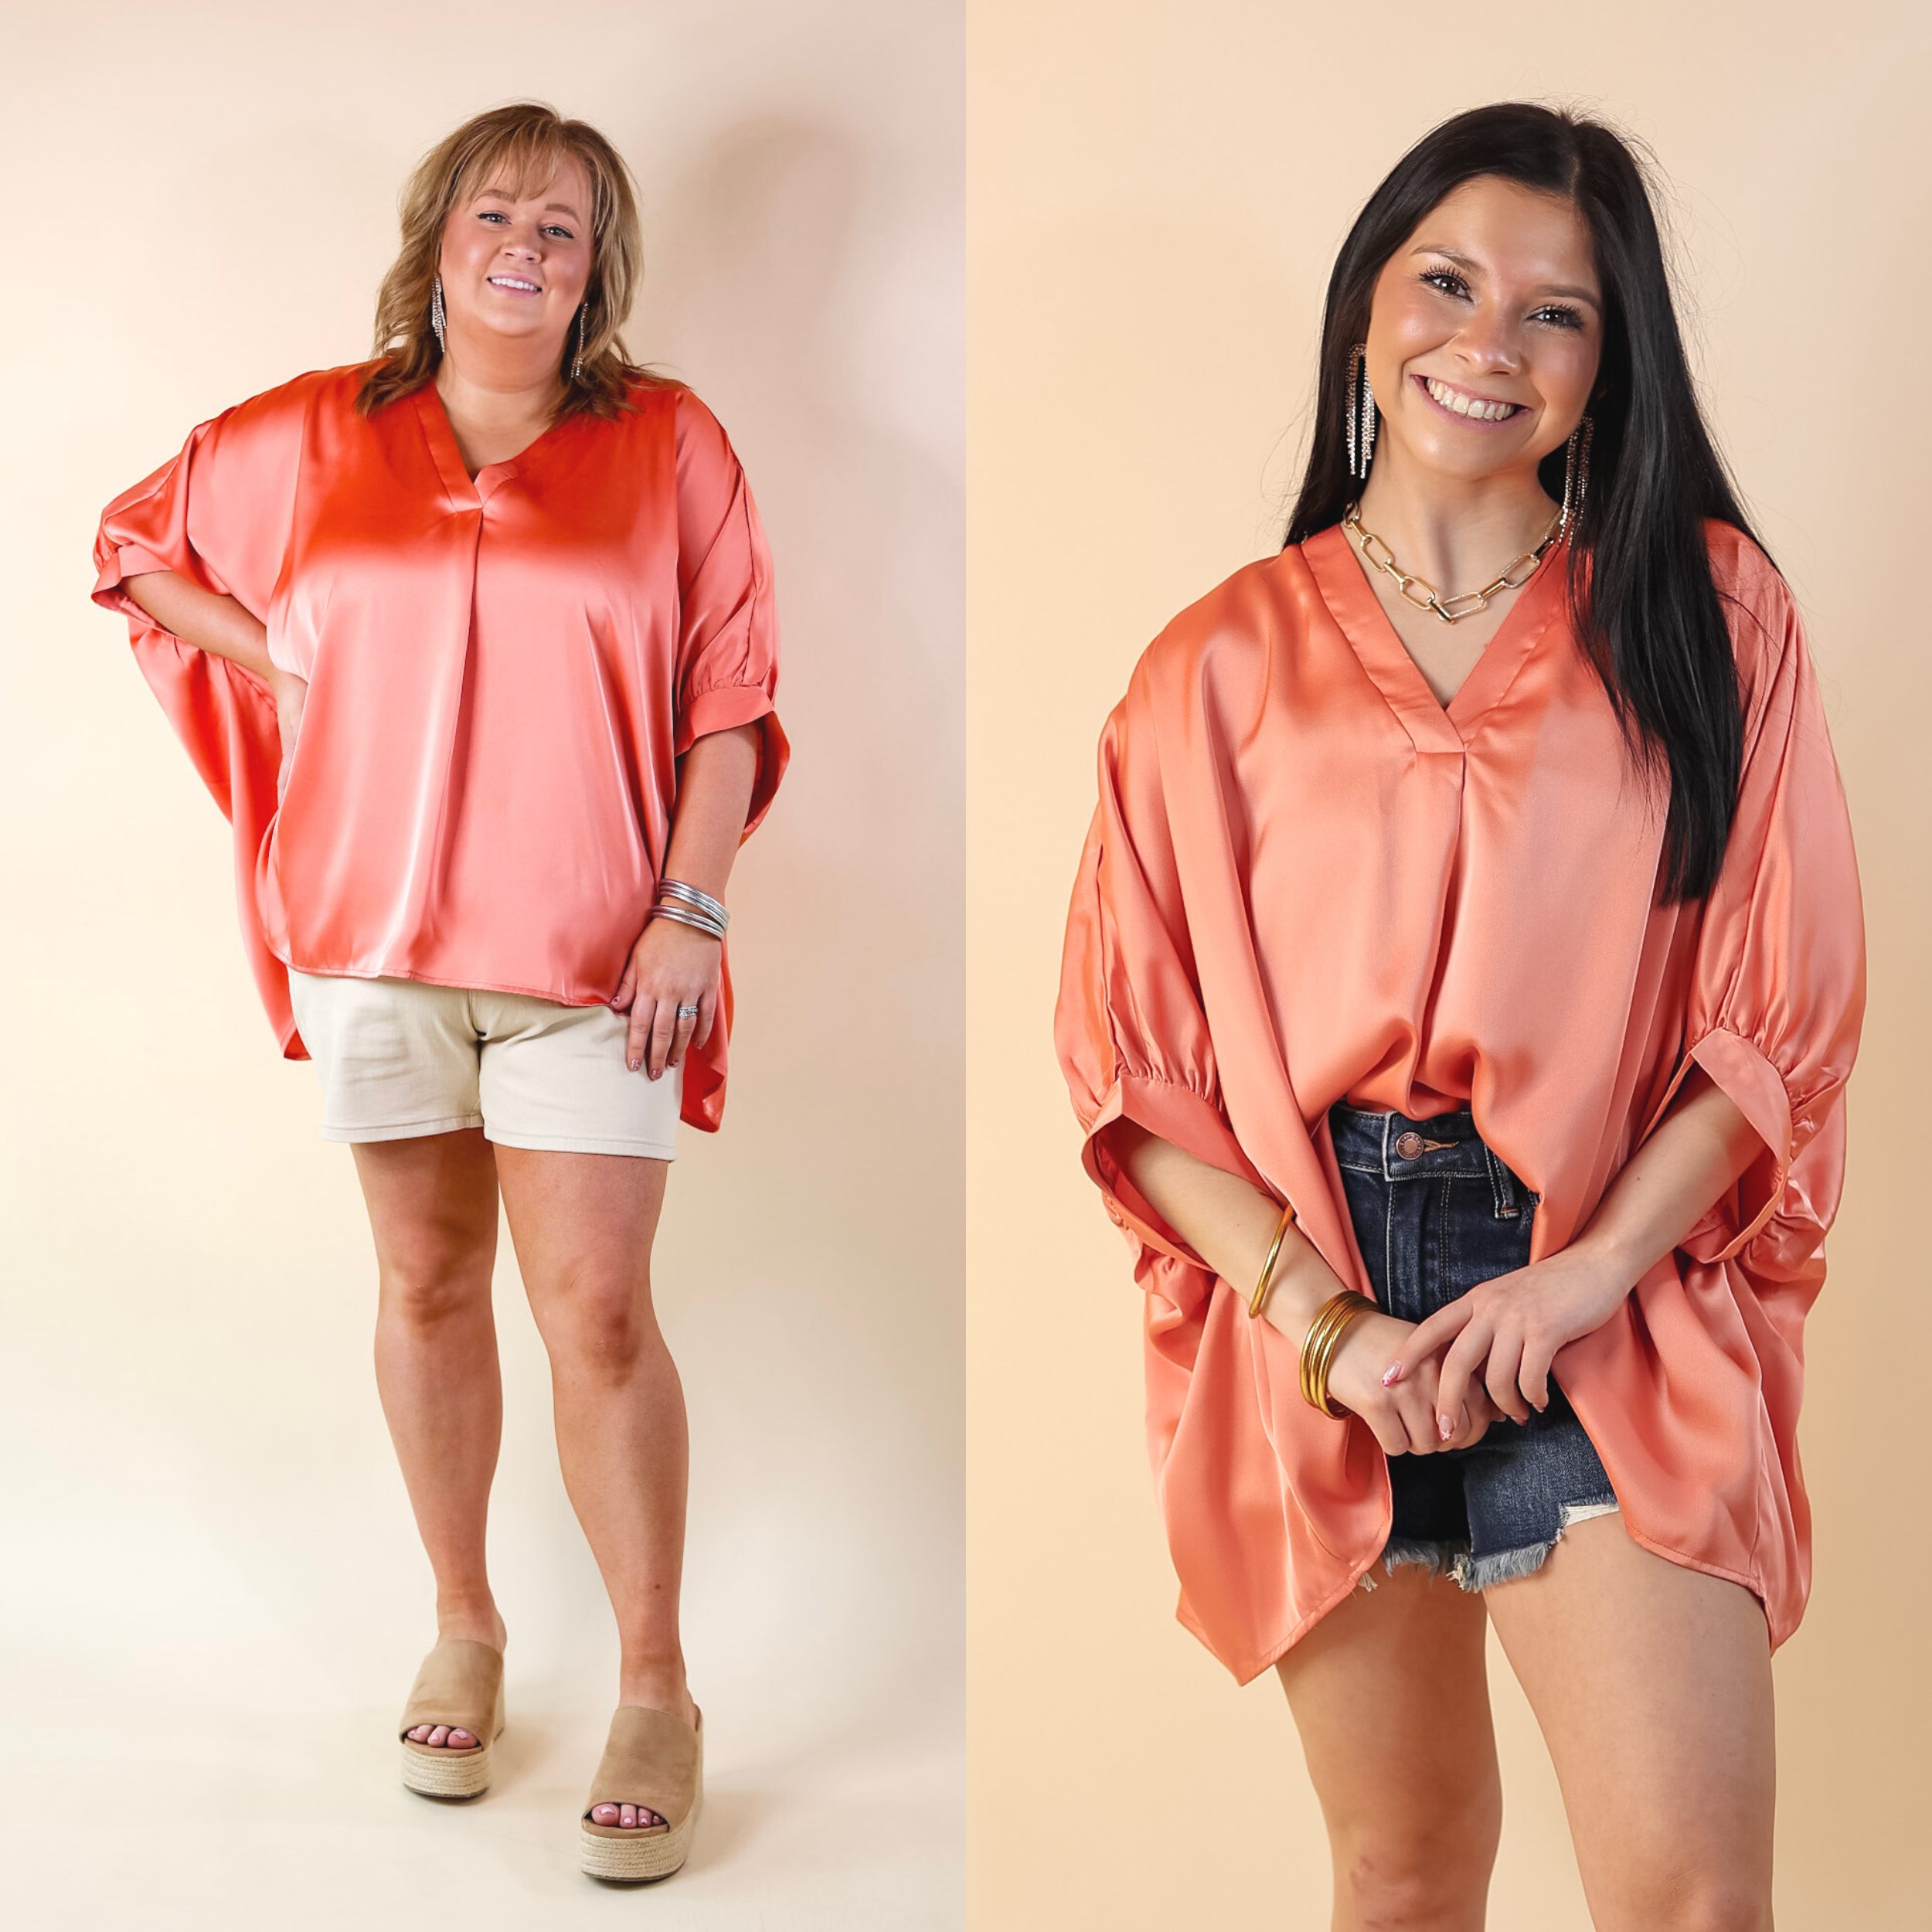 Irresistibly Chic Half Sleeve Oversized Blouse in Coral Orange - Giddy Up Glamour Boutique